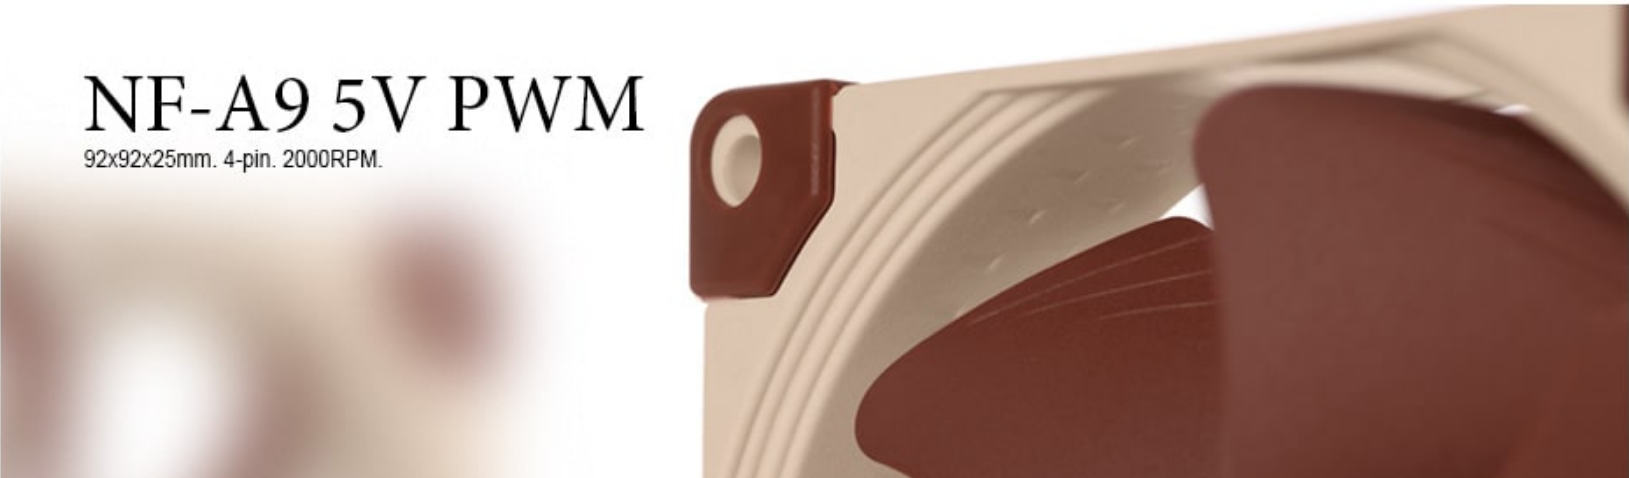 A large marketing image providing additional information about the product Noctua NF-A9 5V PWM 92mm x 25mm 2000RPM Cooling Fan - Additional alt info not provided